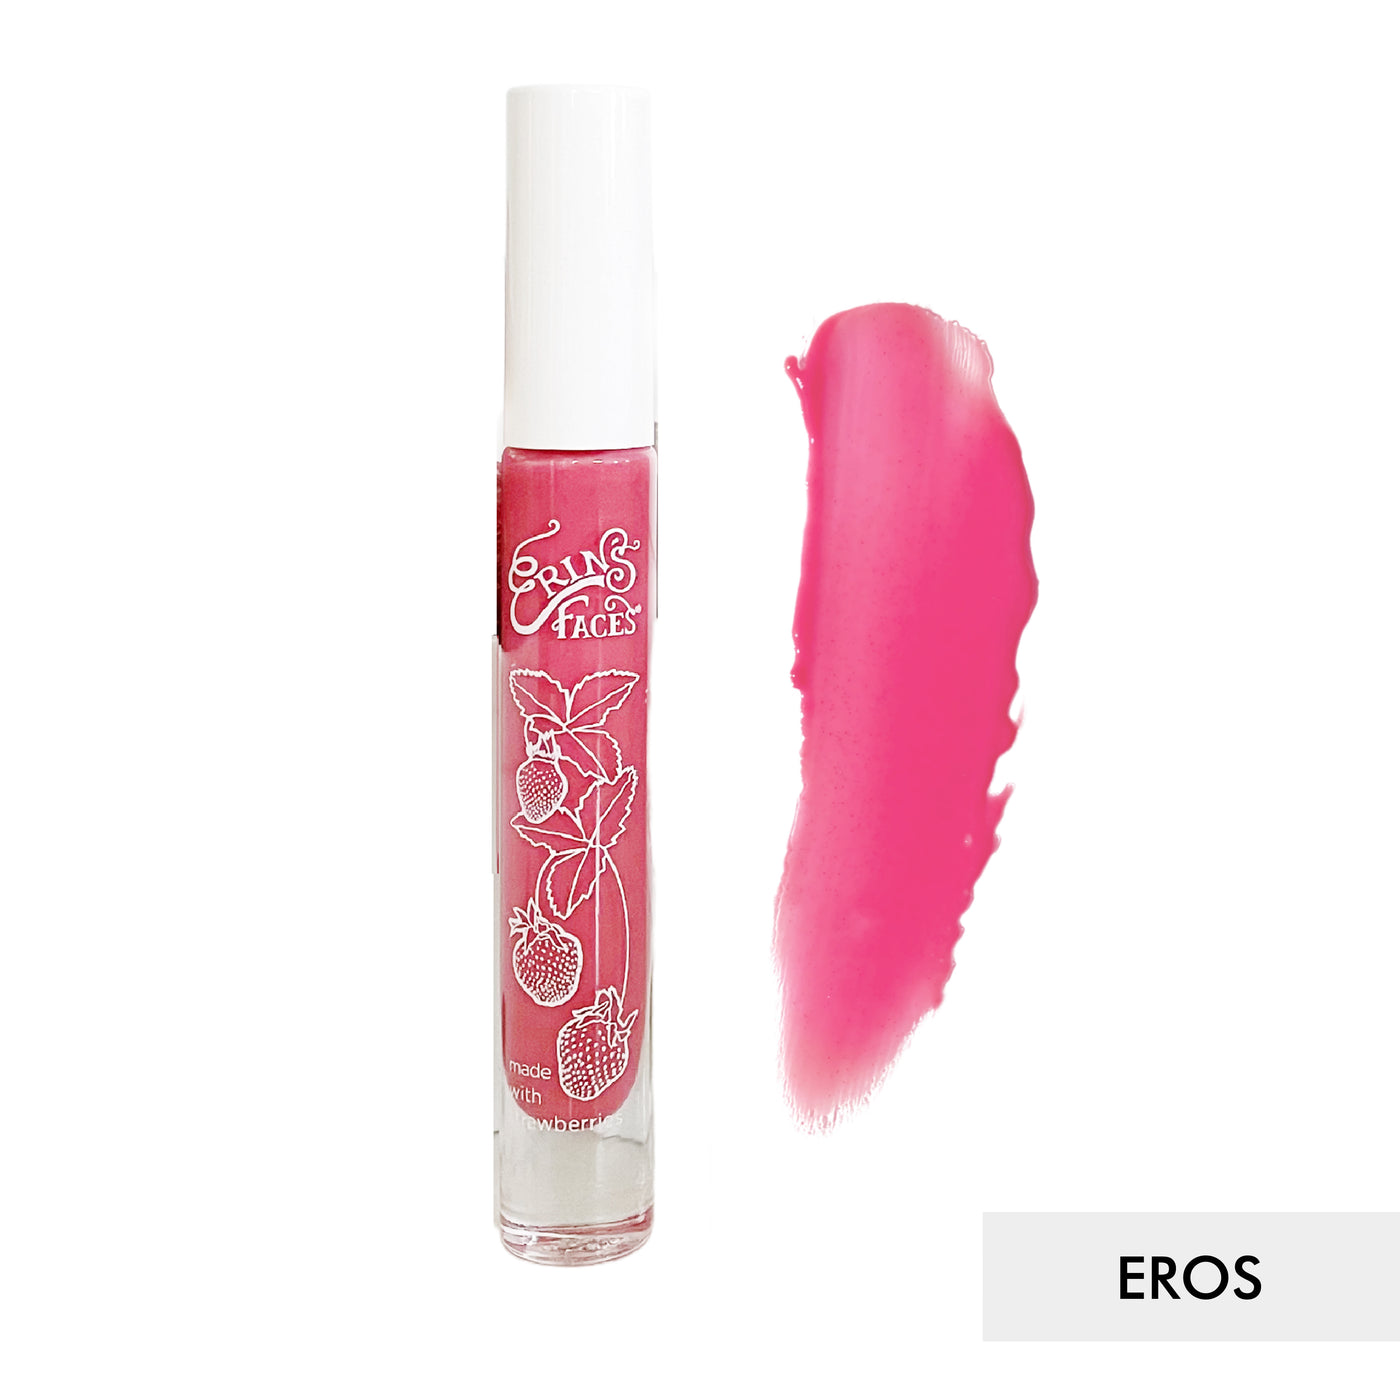 erin's faces fruit smoothie lip gloss bottle and swatch against white background of the shade eros